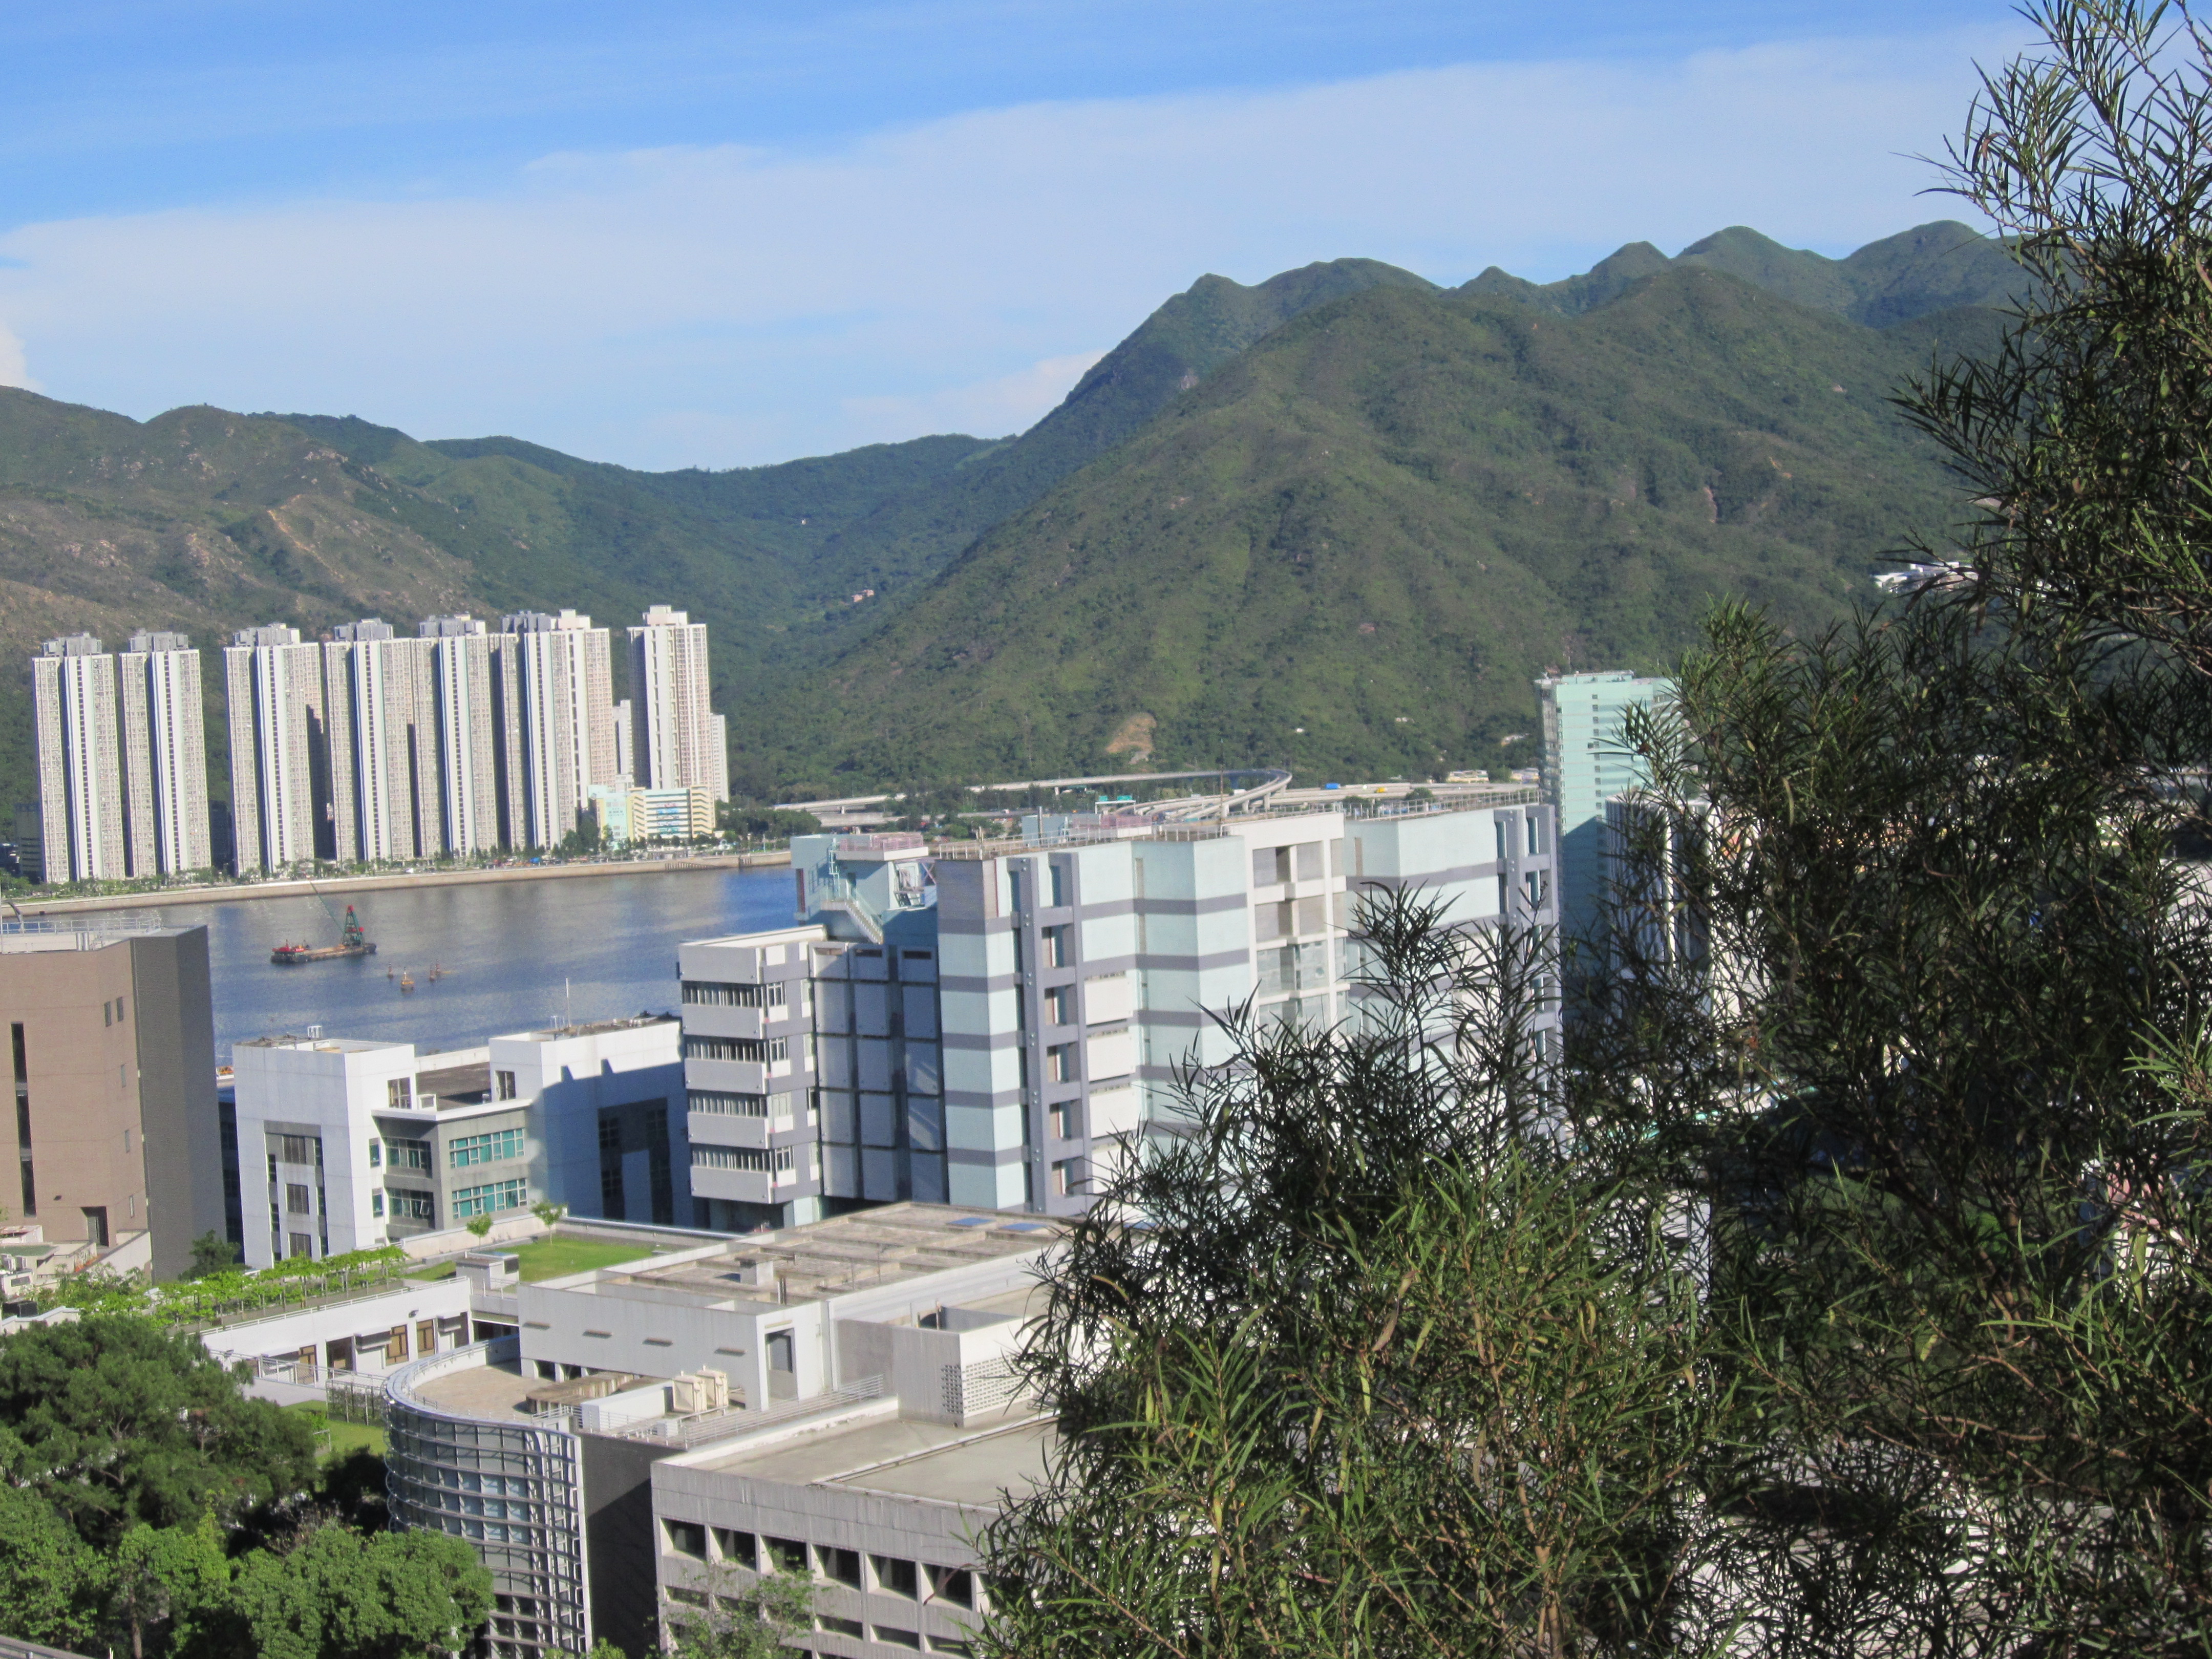 stunning campus view, with green, high rising mountains in the background, and CUHK's campus in the foreground.